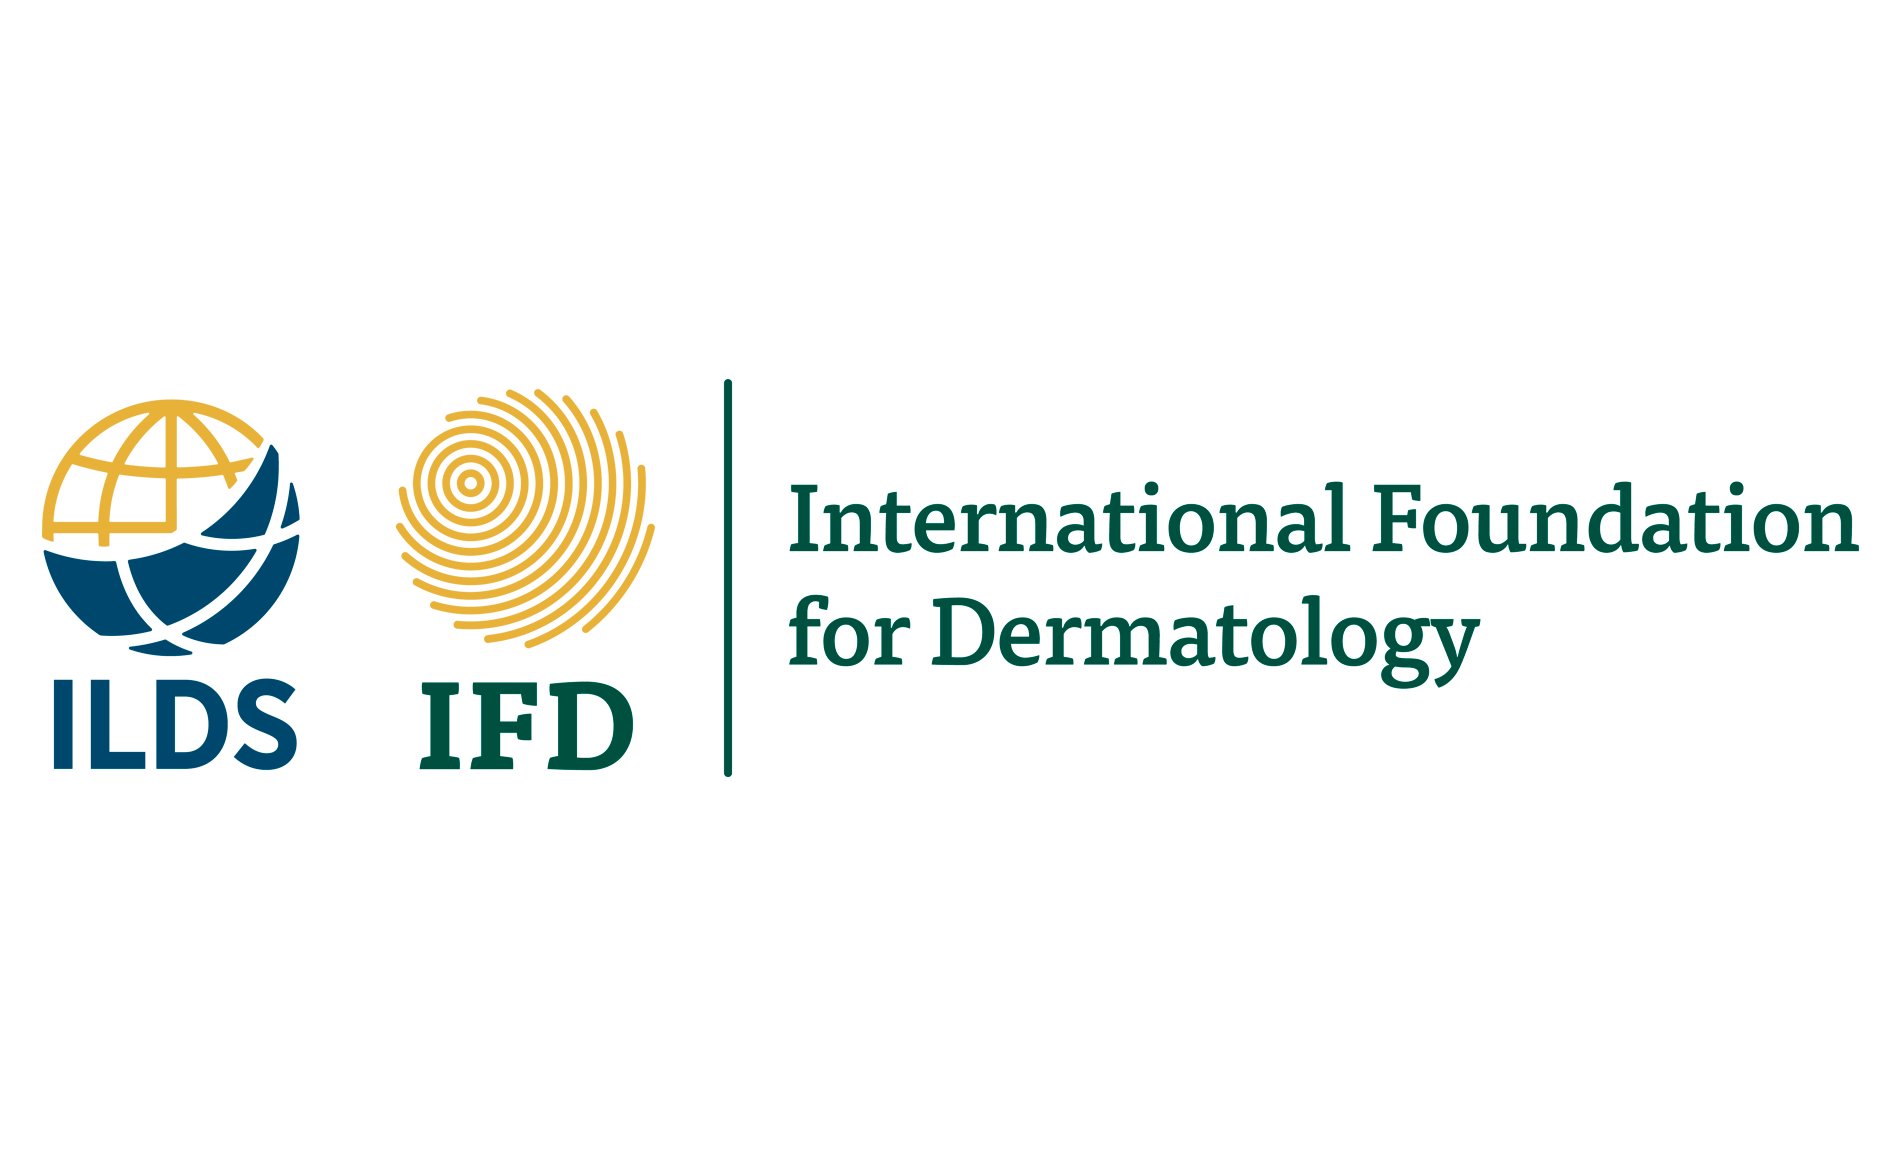 An Invitation From The International Foundation for Dermatology